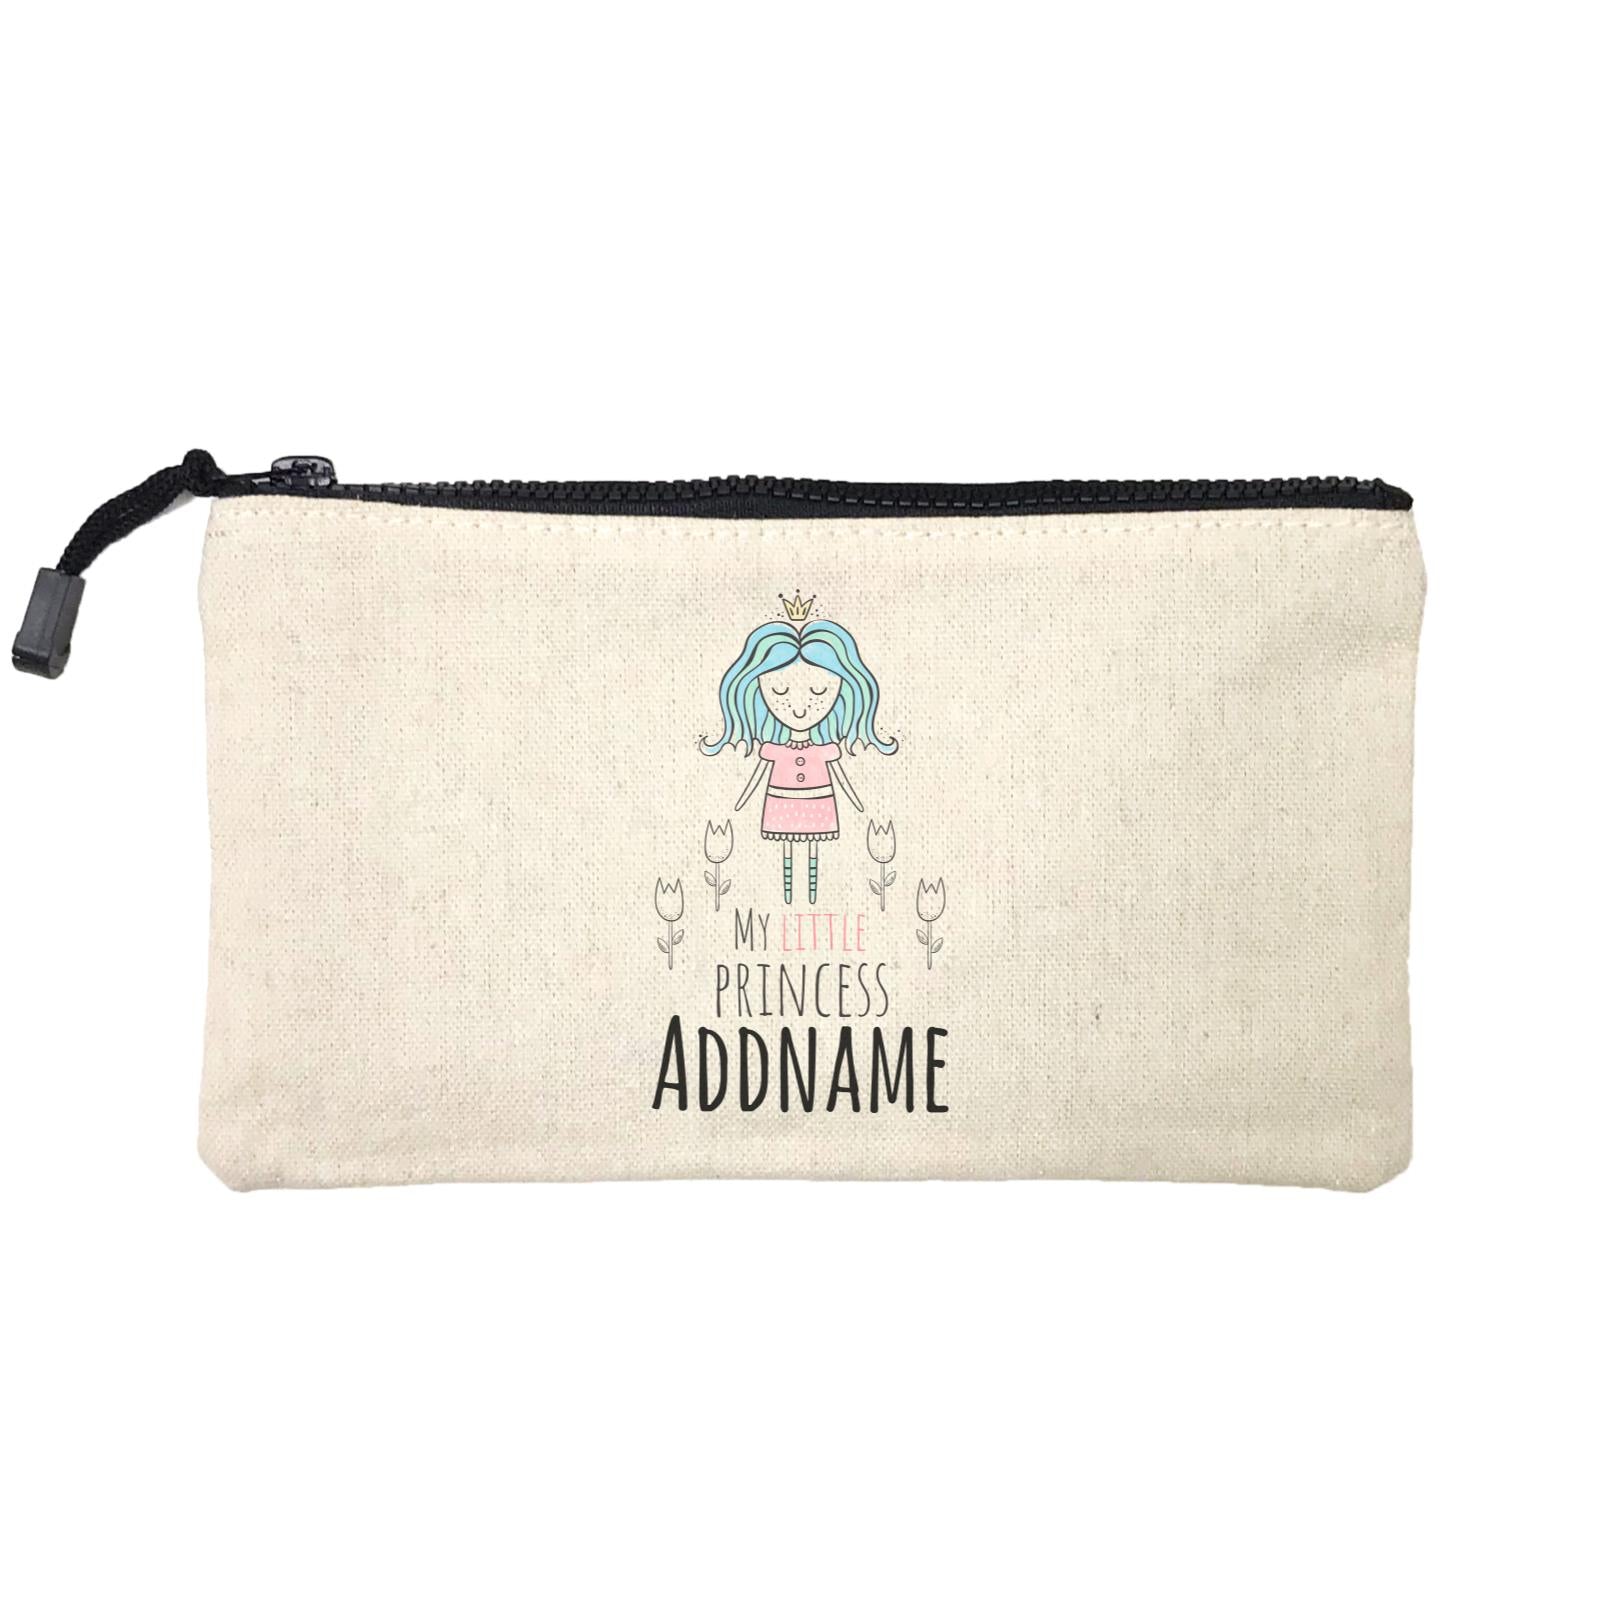 Drawn Dreamy Elements Little Princess Addname Mini Accessories Stationery Pouch